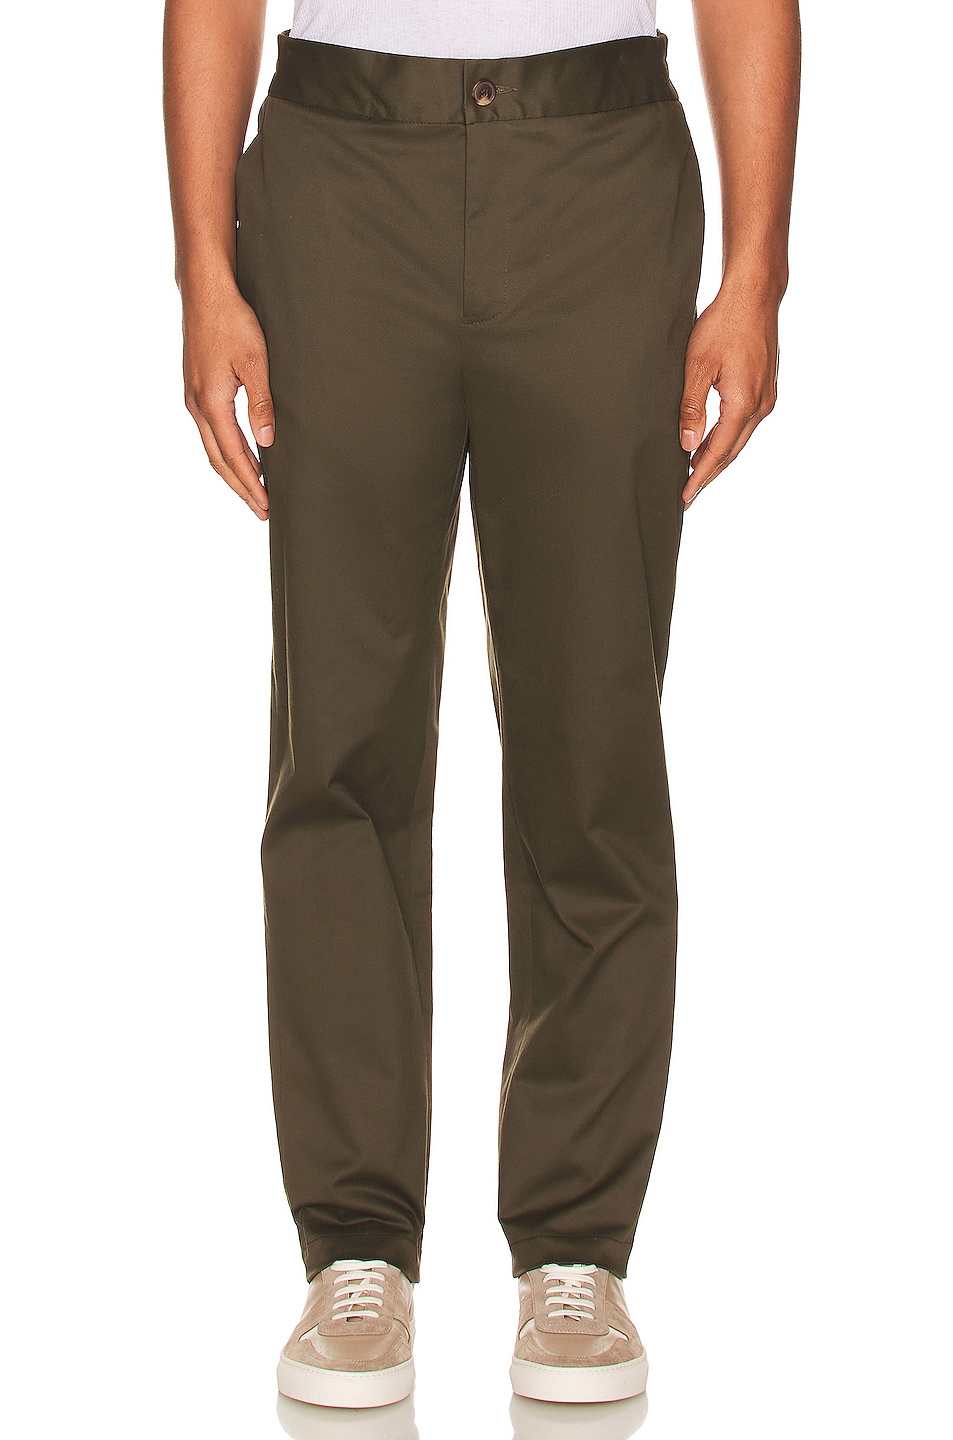 The Chino Pant in Olive